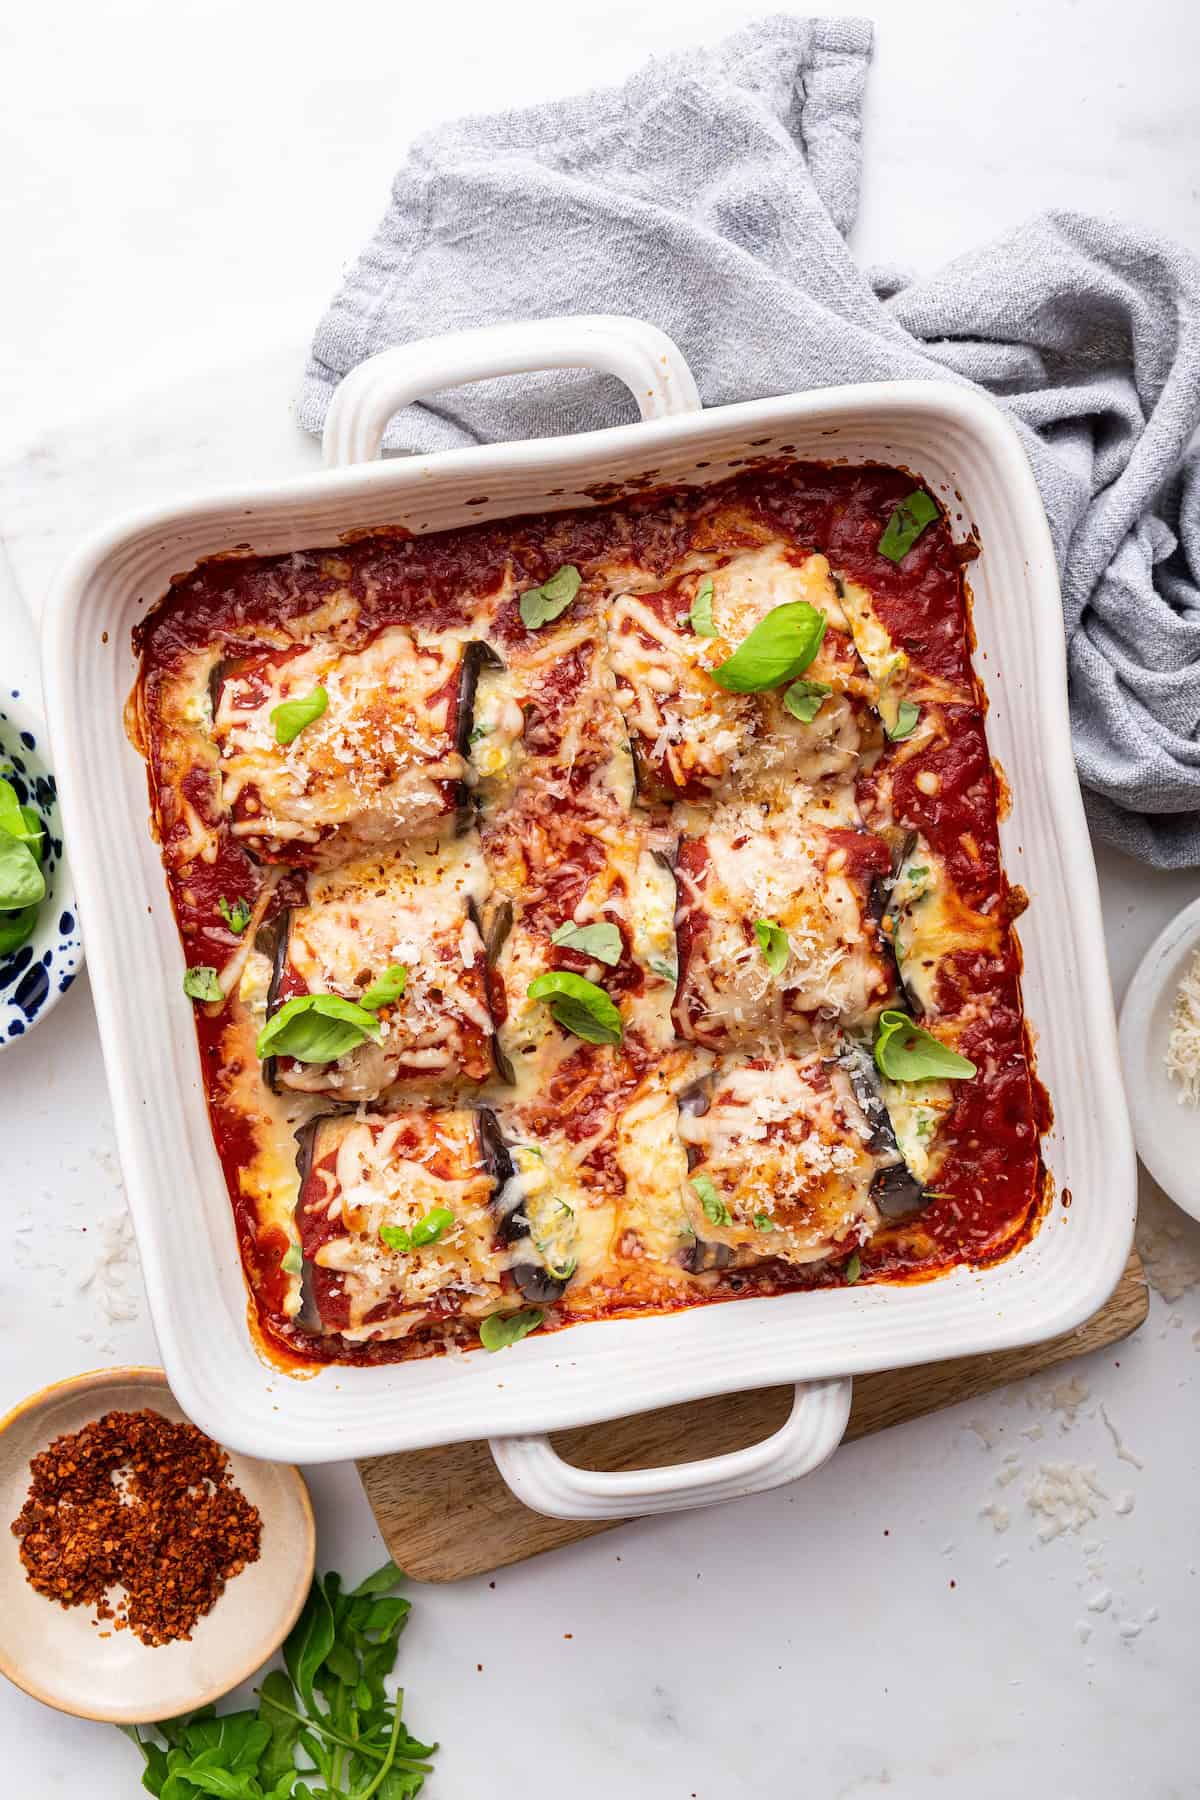 Overhead view of eggplant rollatini in square baking dish